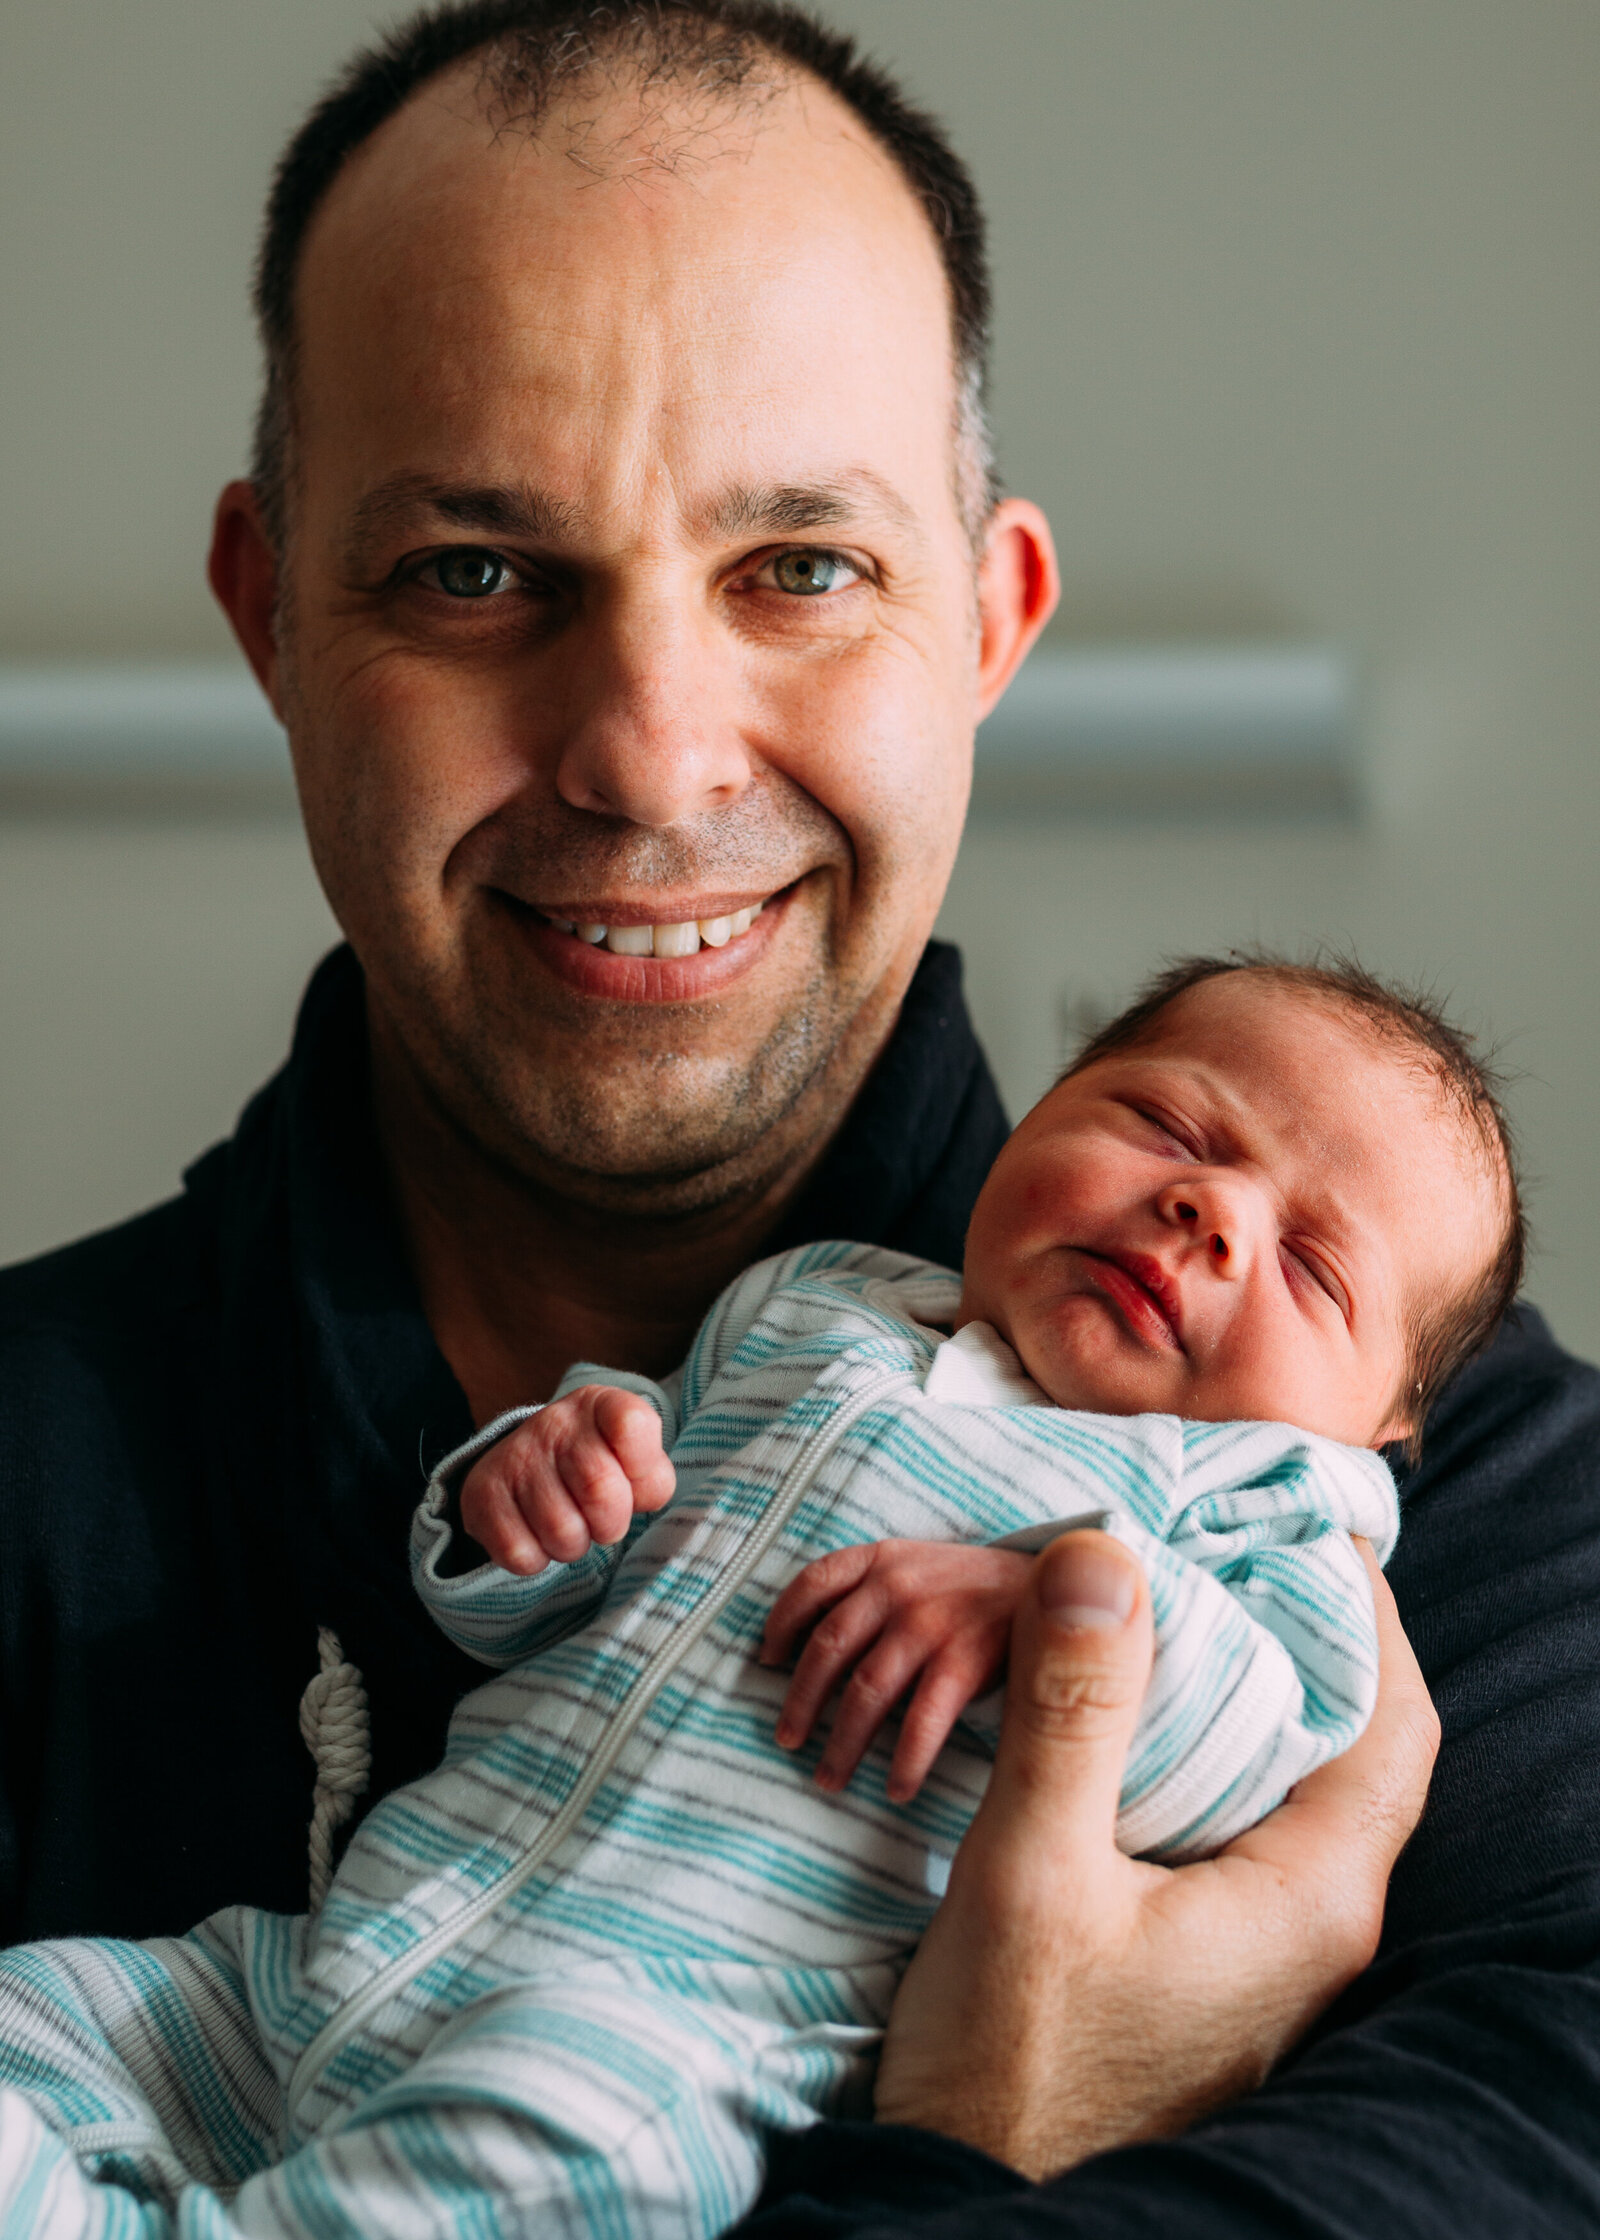 proud dad with baby In hospital Fresh 48 photography Melbourne And So I Don’t Forget Photography